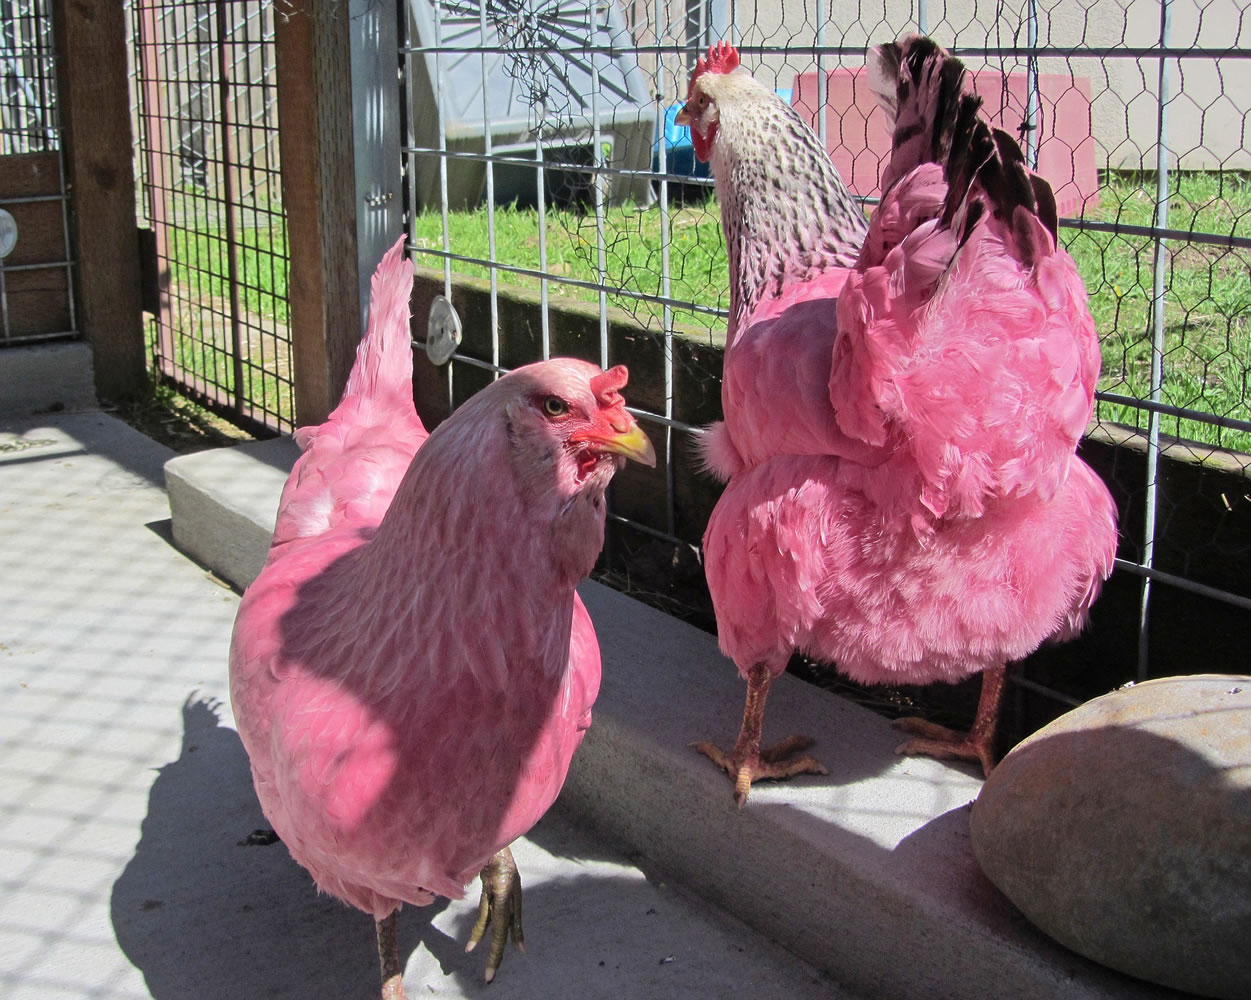 Randall Brown/Multnomah County Animal Services
A pair of chickens, dyed pink, are photographed in Portland, Ore. The animals were picked up earlier this week running loose in the city's waterfront park.